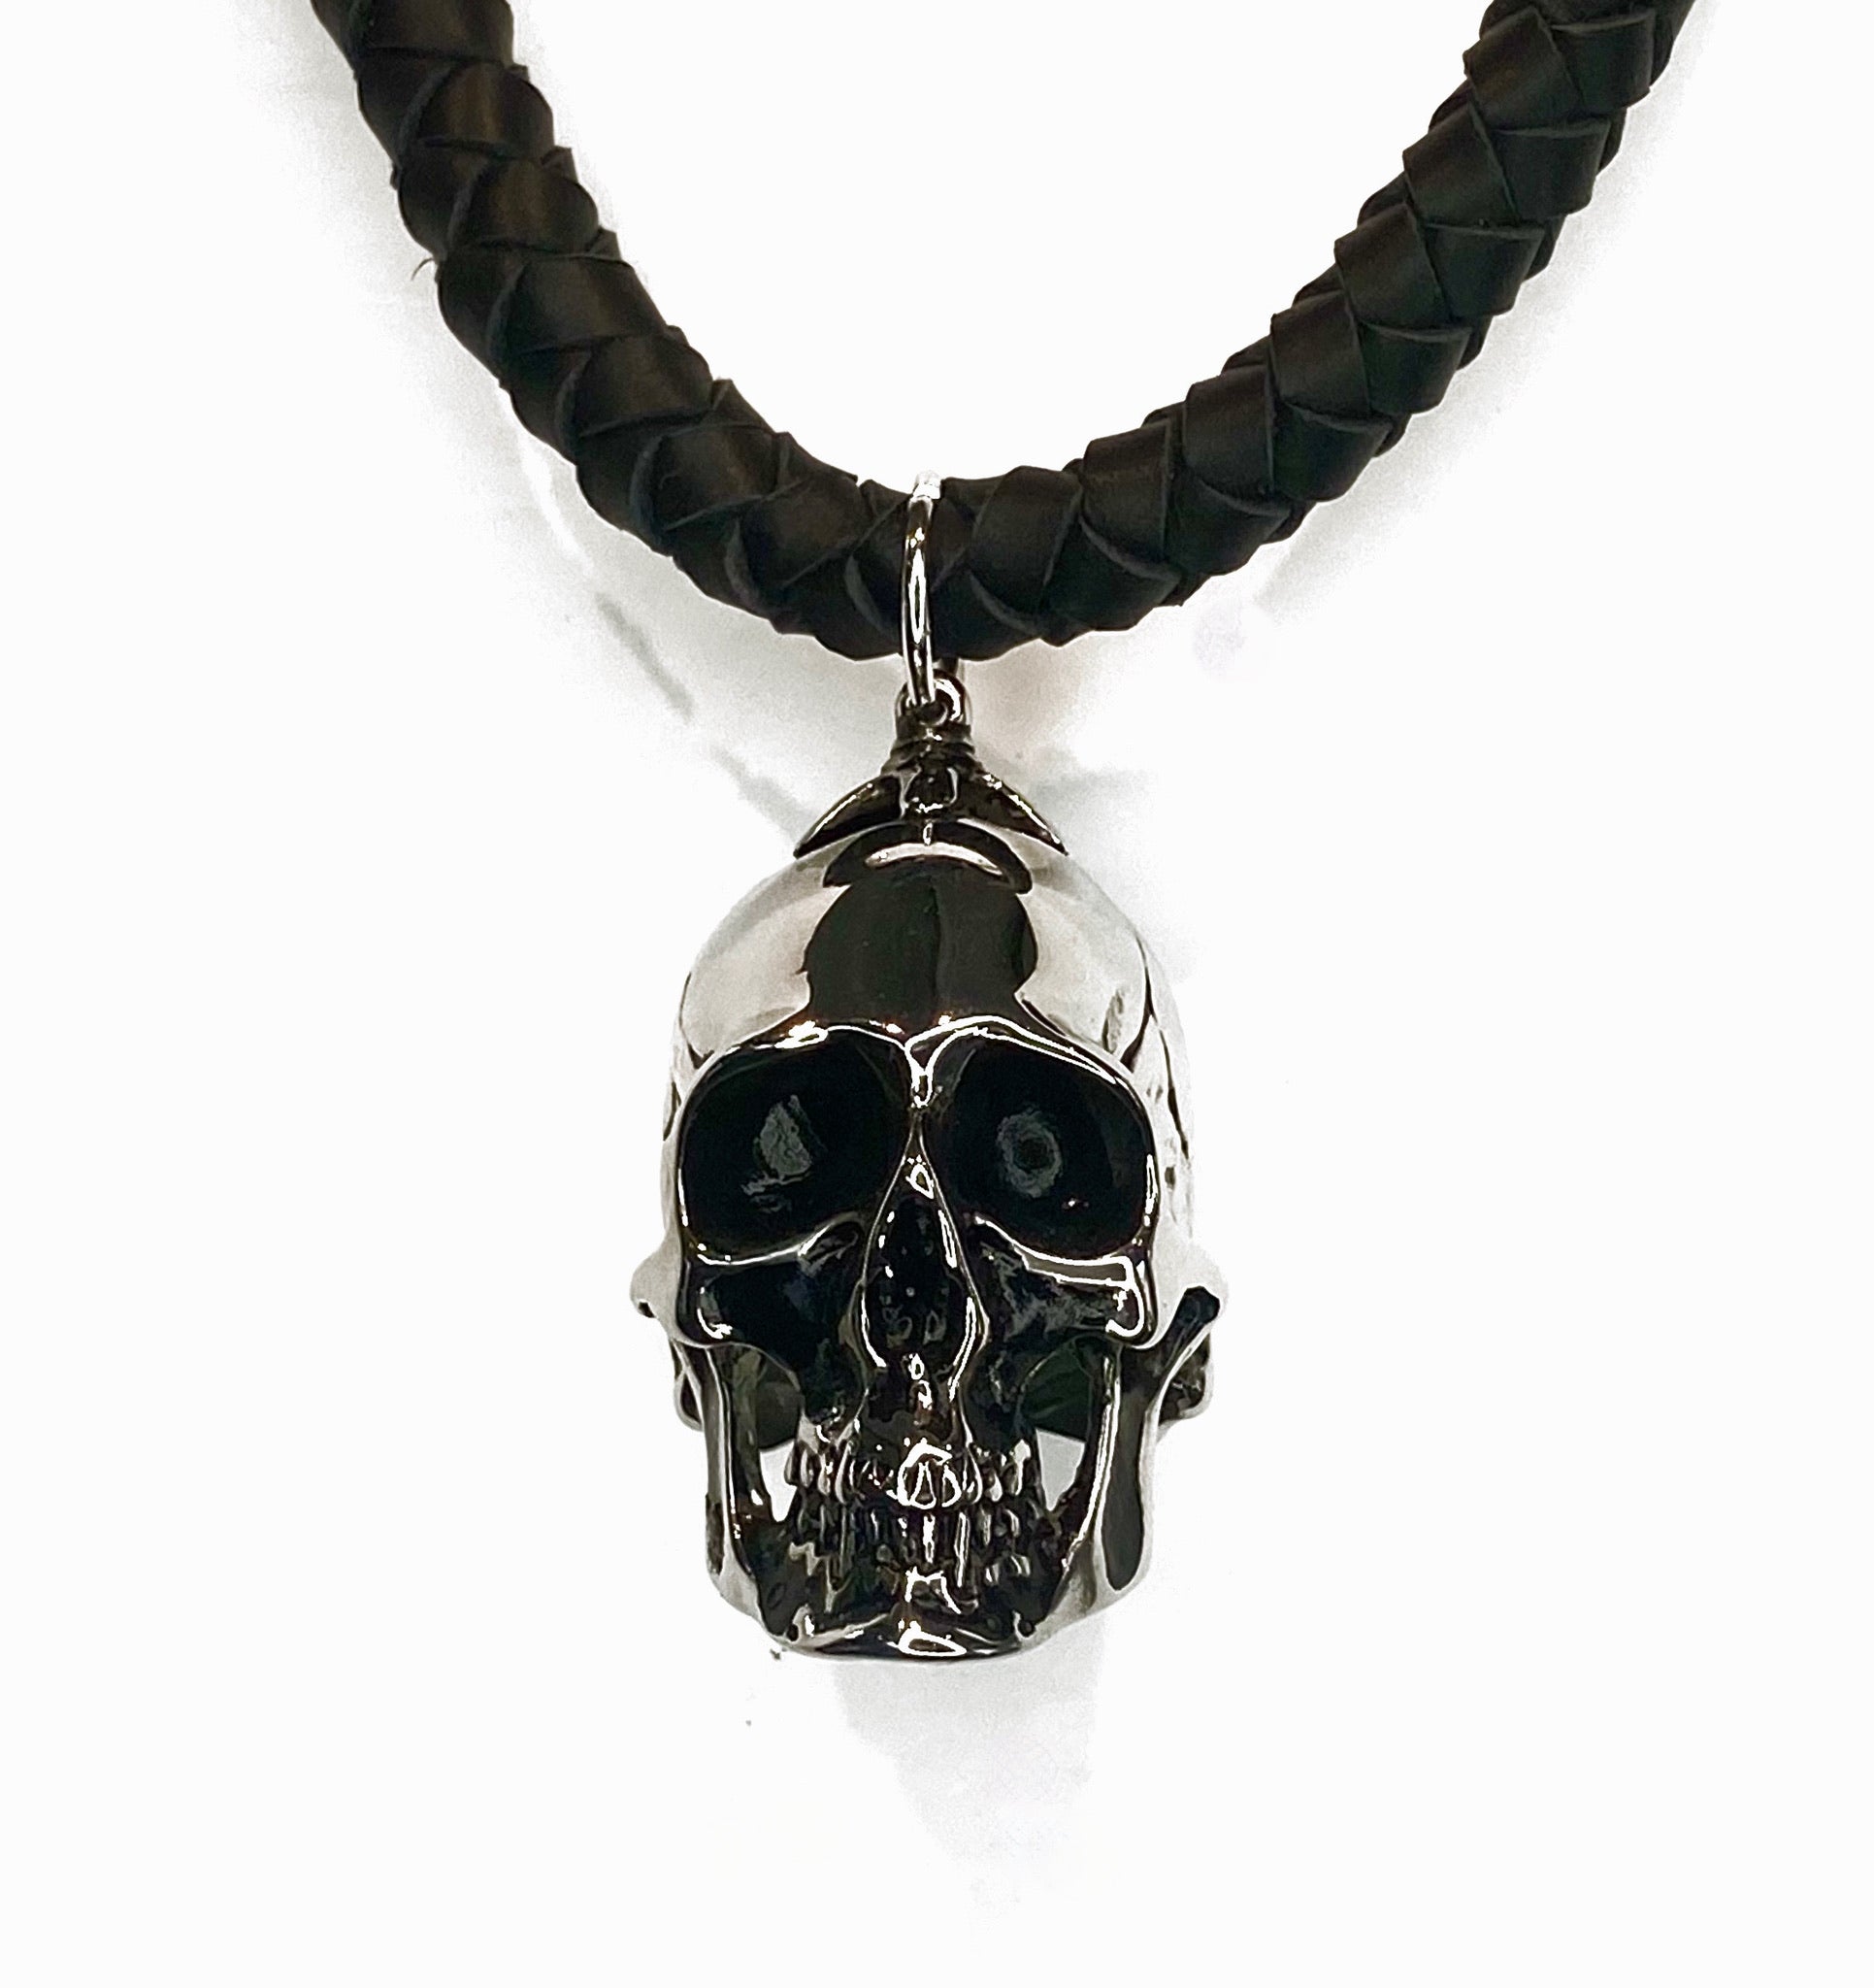 THICK HAND-BRAIDED DEERSKIN LEATHER NECKLACE WITH HEAVYWEIGHT SKULL PENDANT. by nyet jewelry 